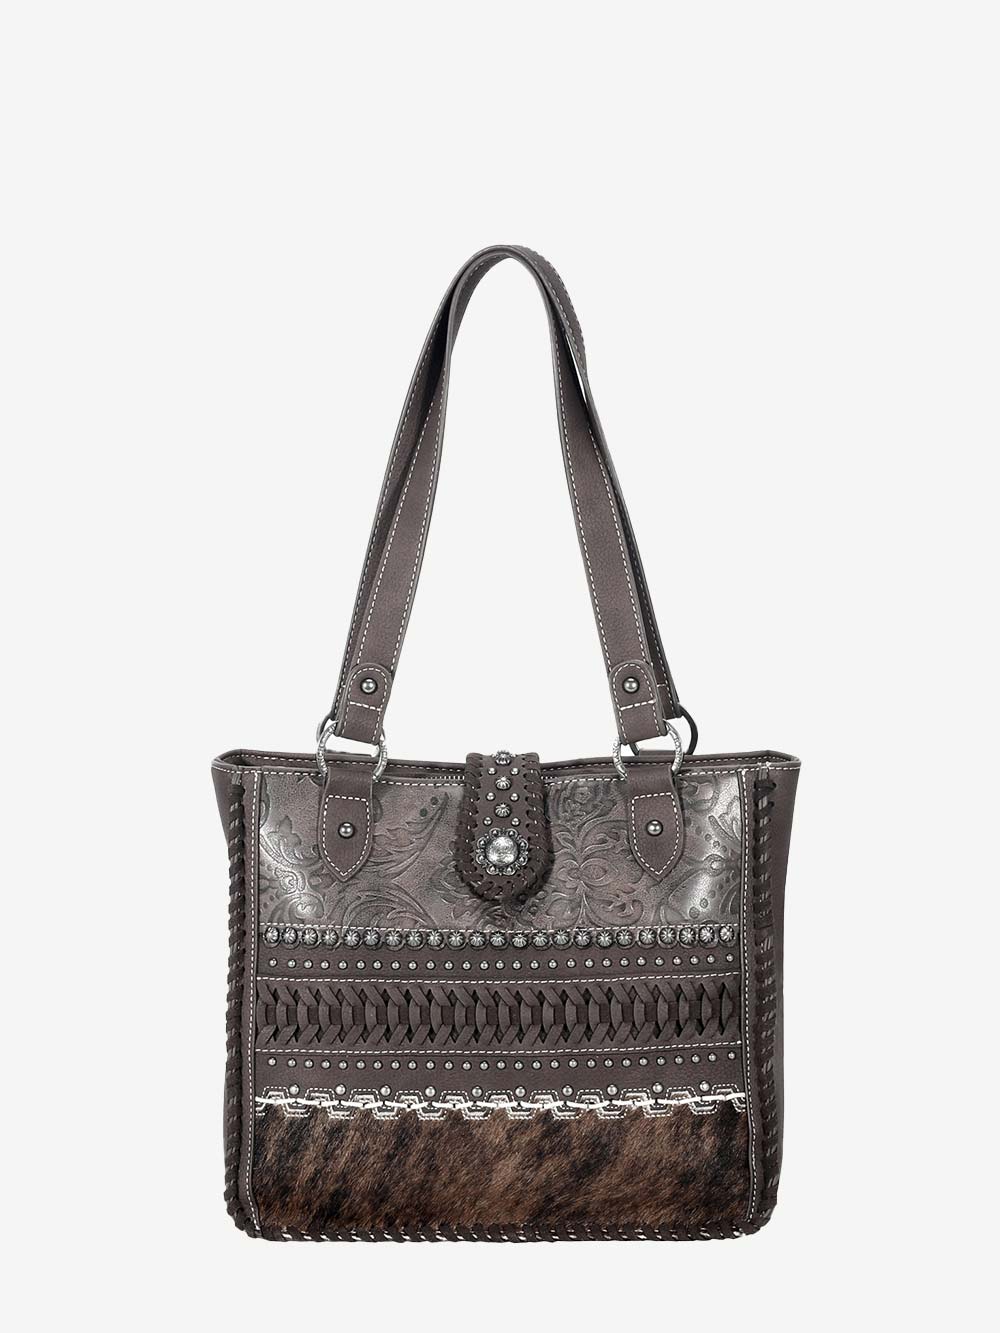 Trinity Ranch Hair On Cowhide Embossed Floral Concho Tote Bag - Montana West World